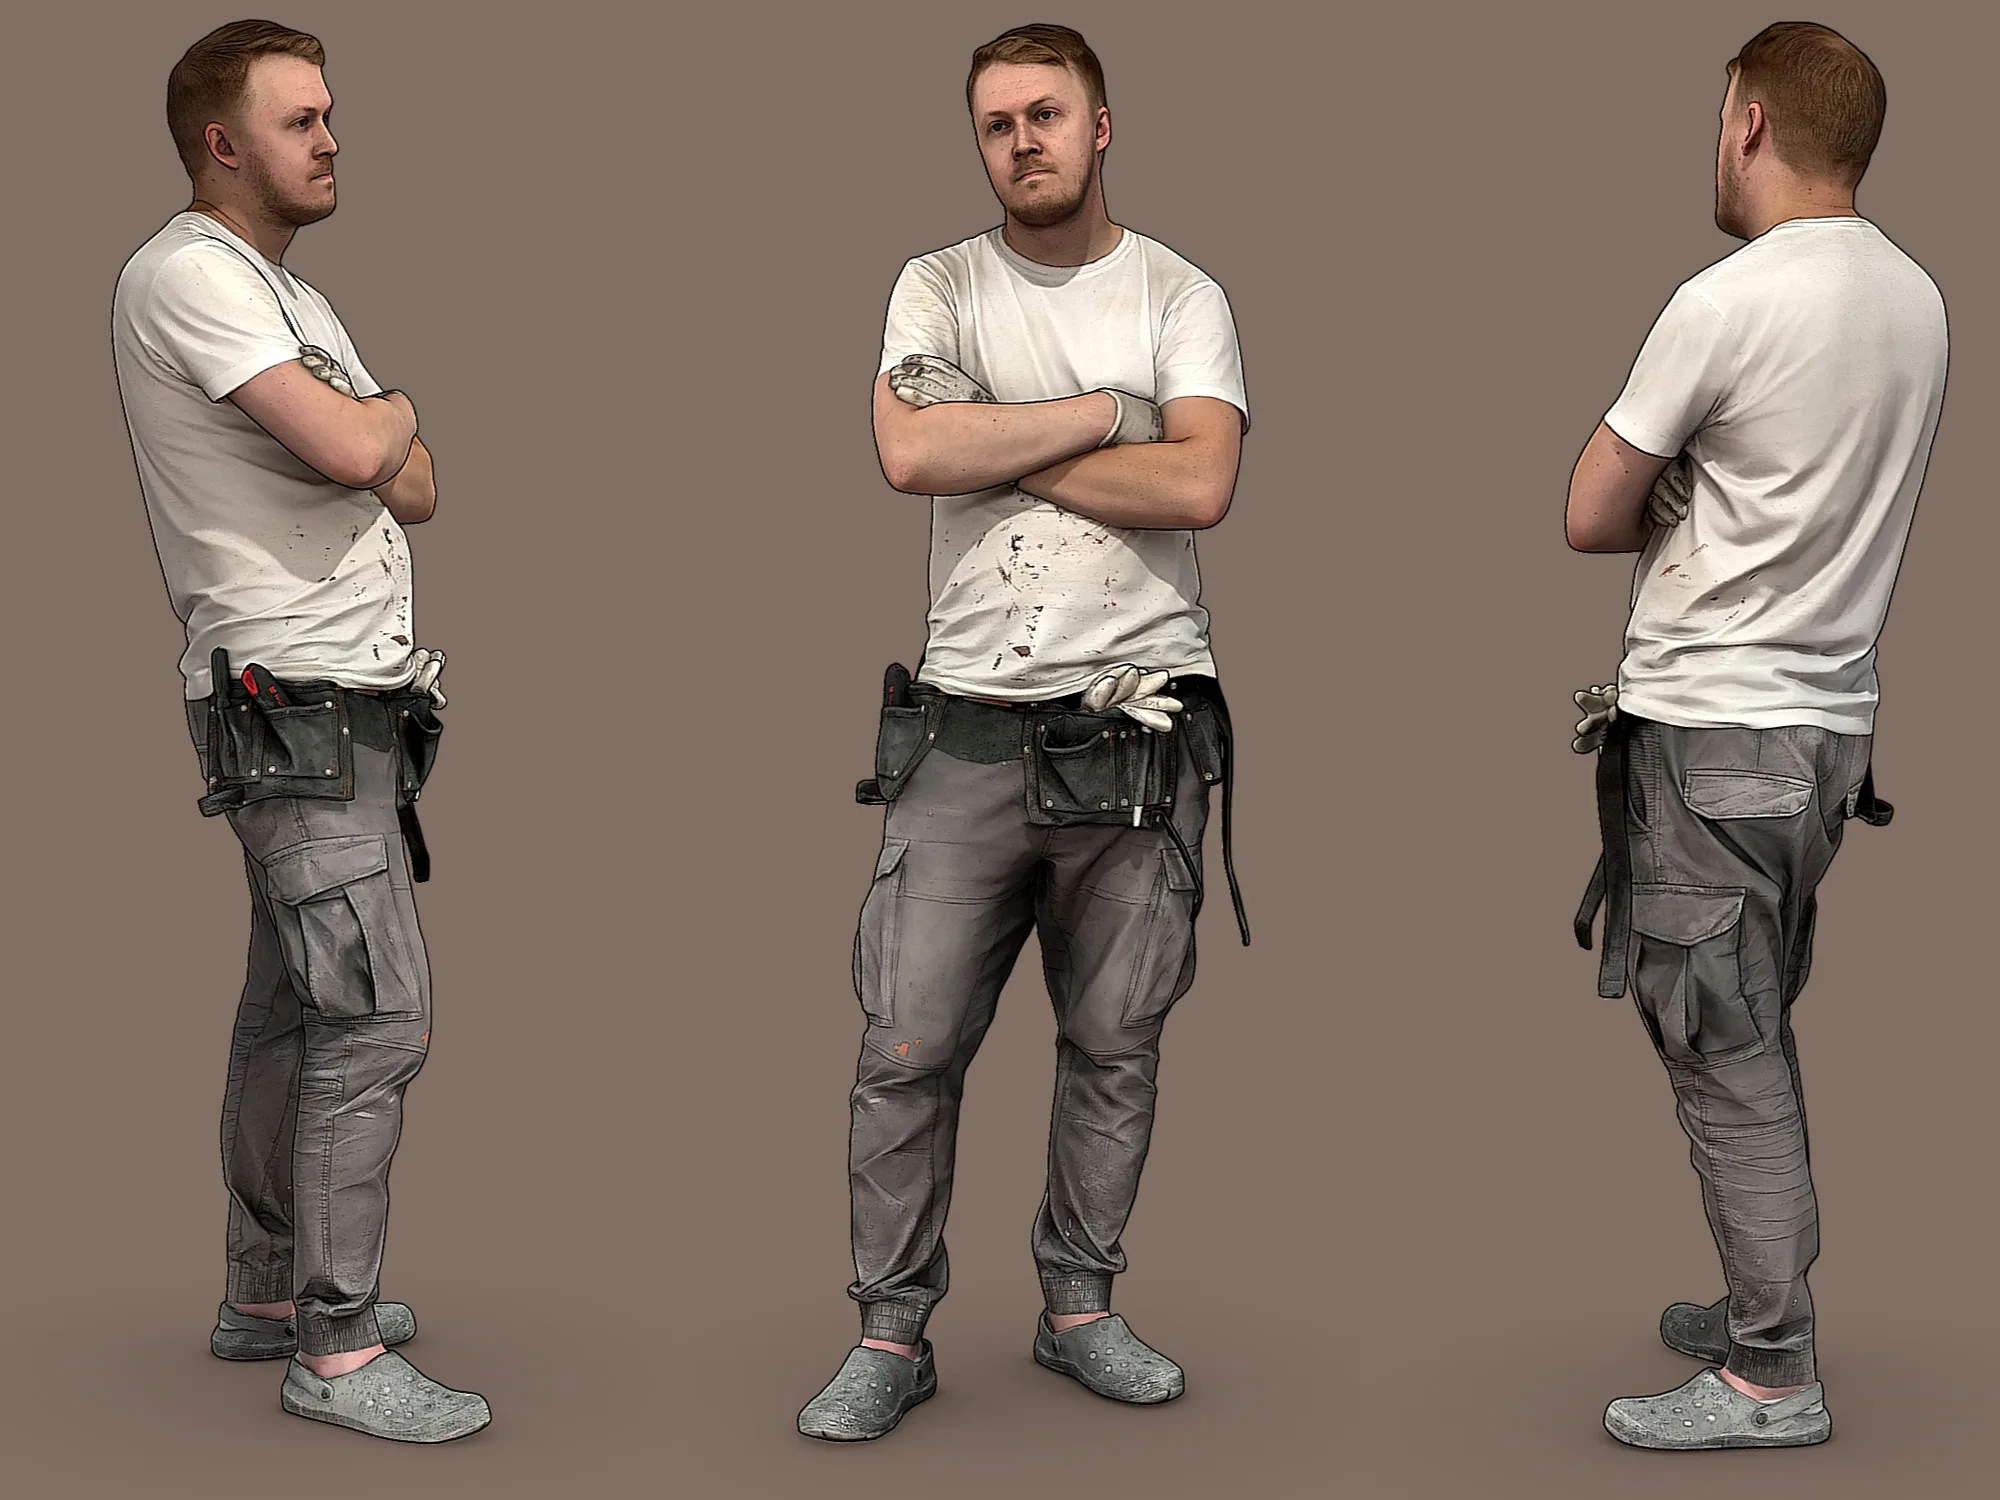 Worker in a White T-shirt model pack